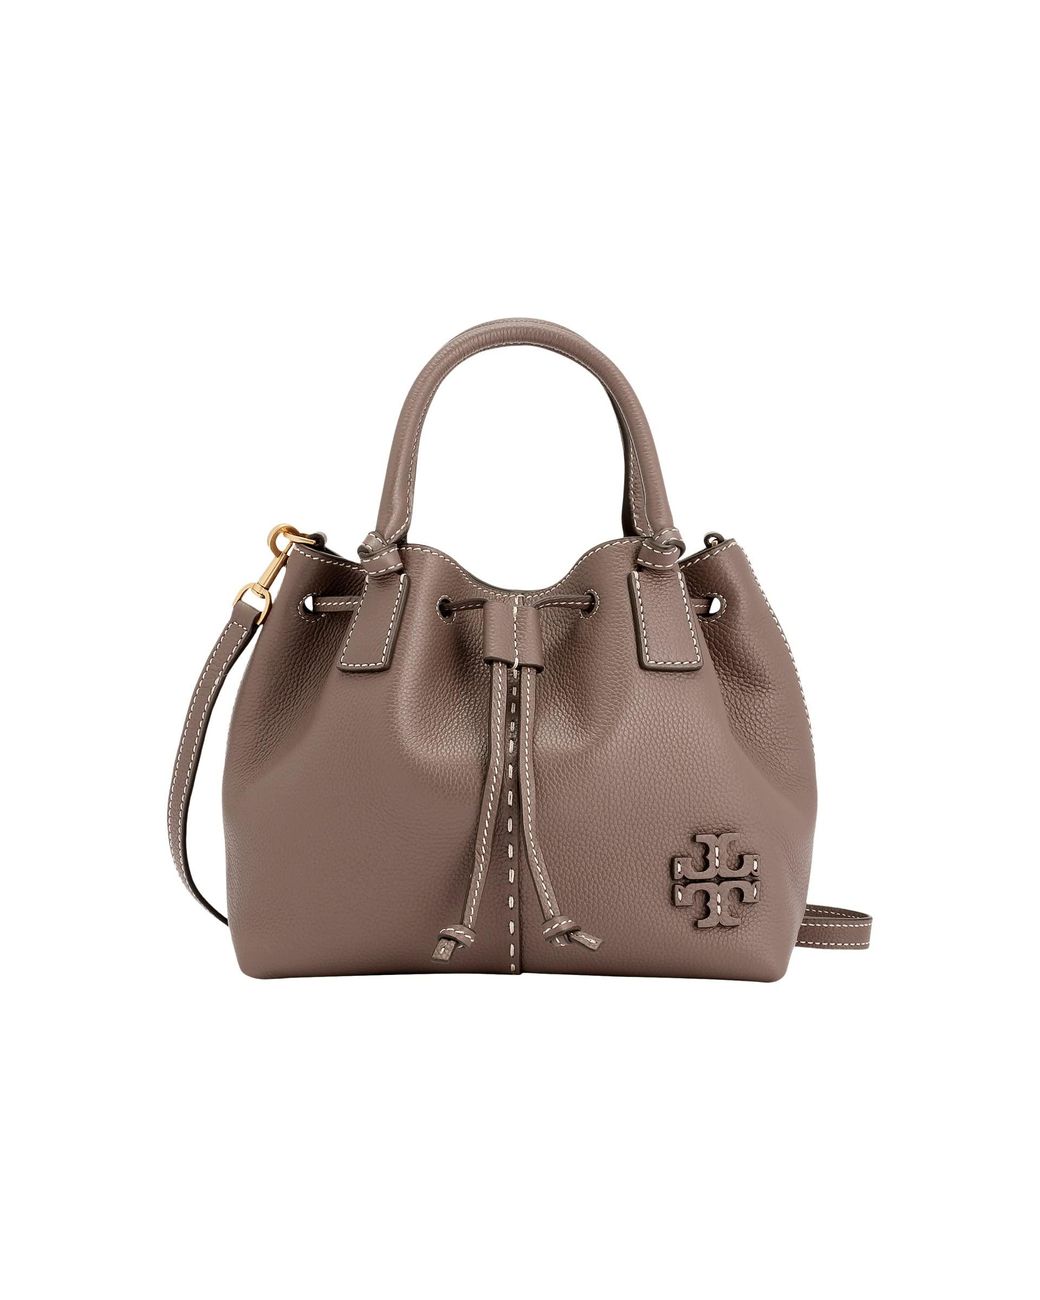 Tory Burch Leather Mcgraw Small Drawstring Satchel in Beige 